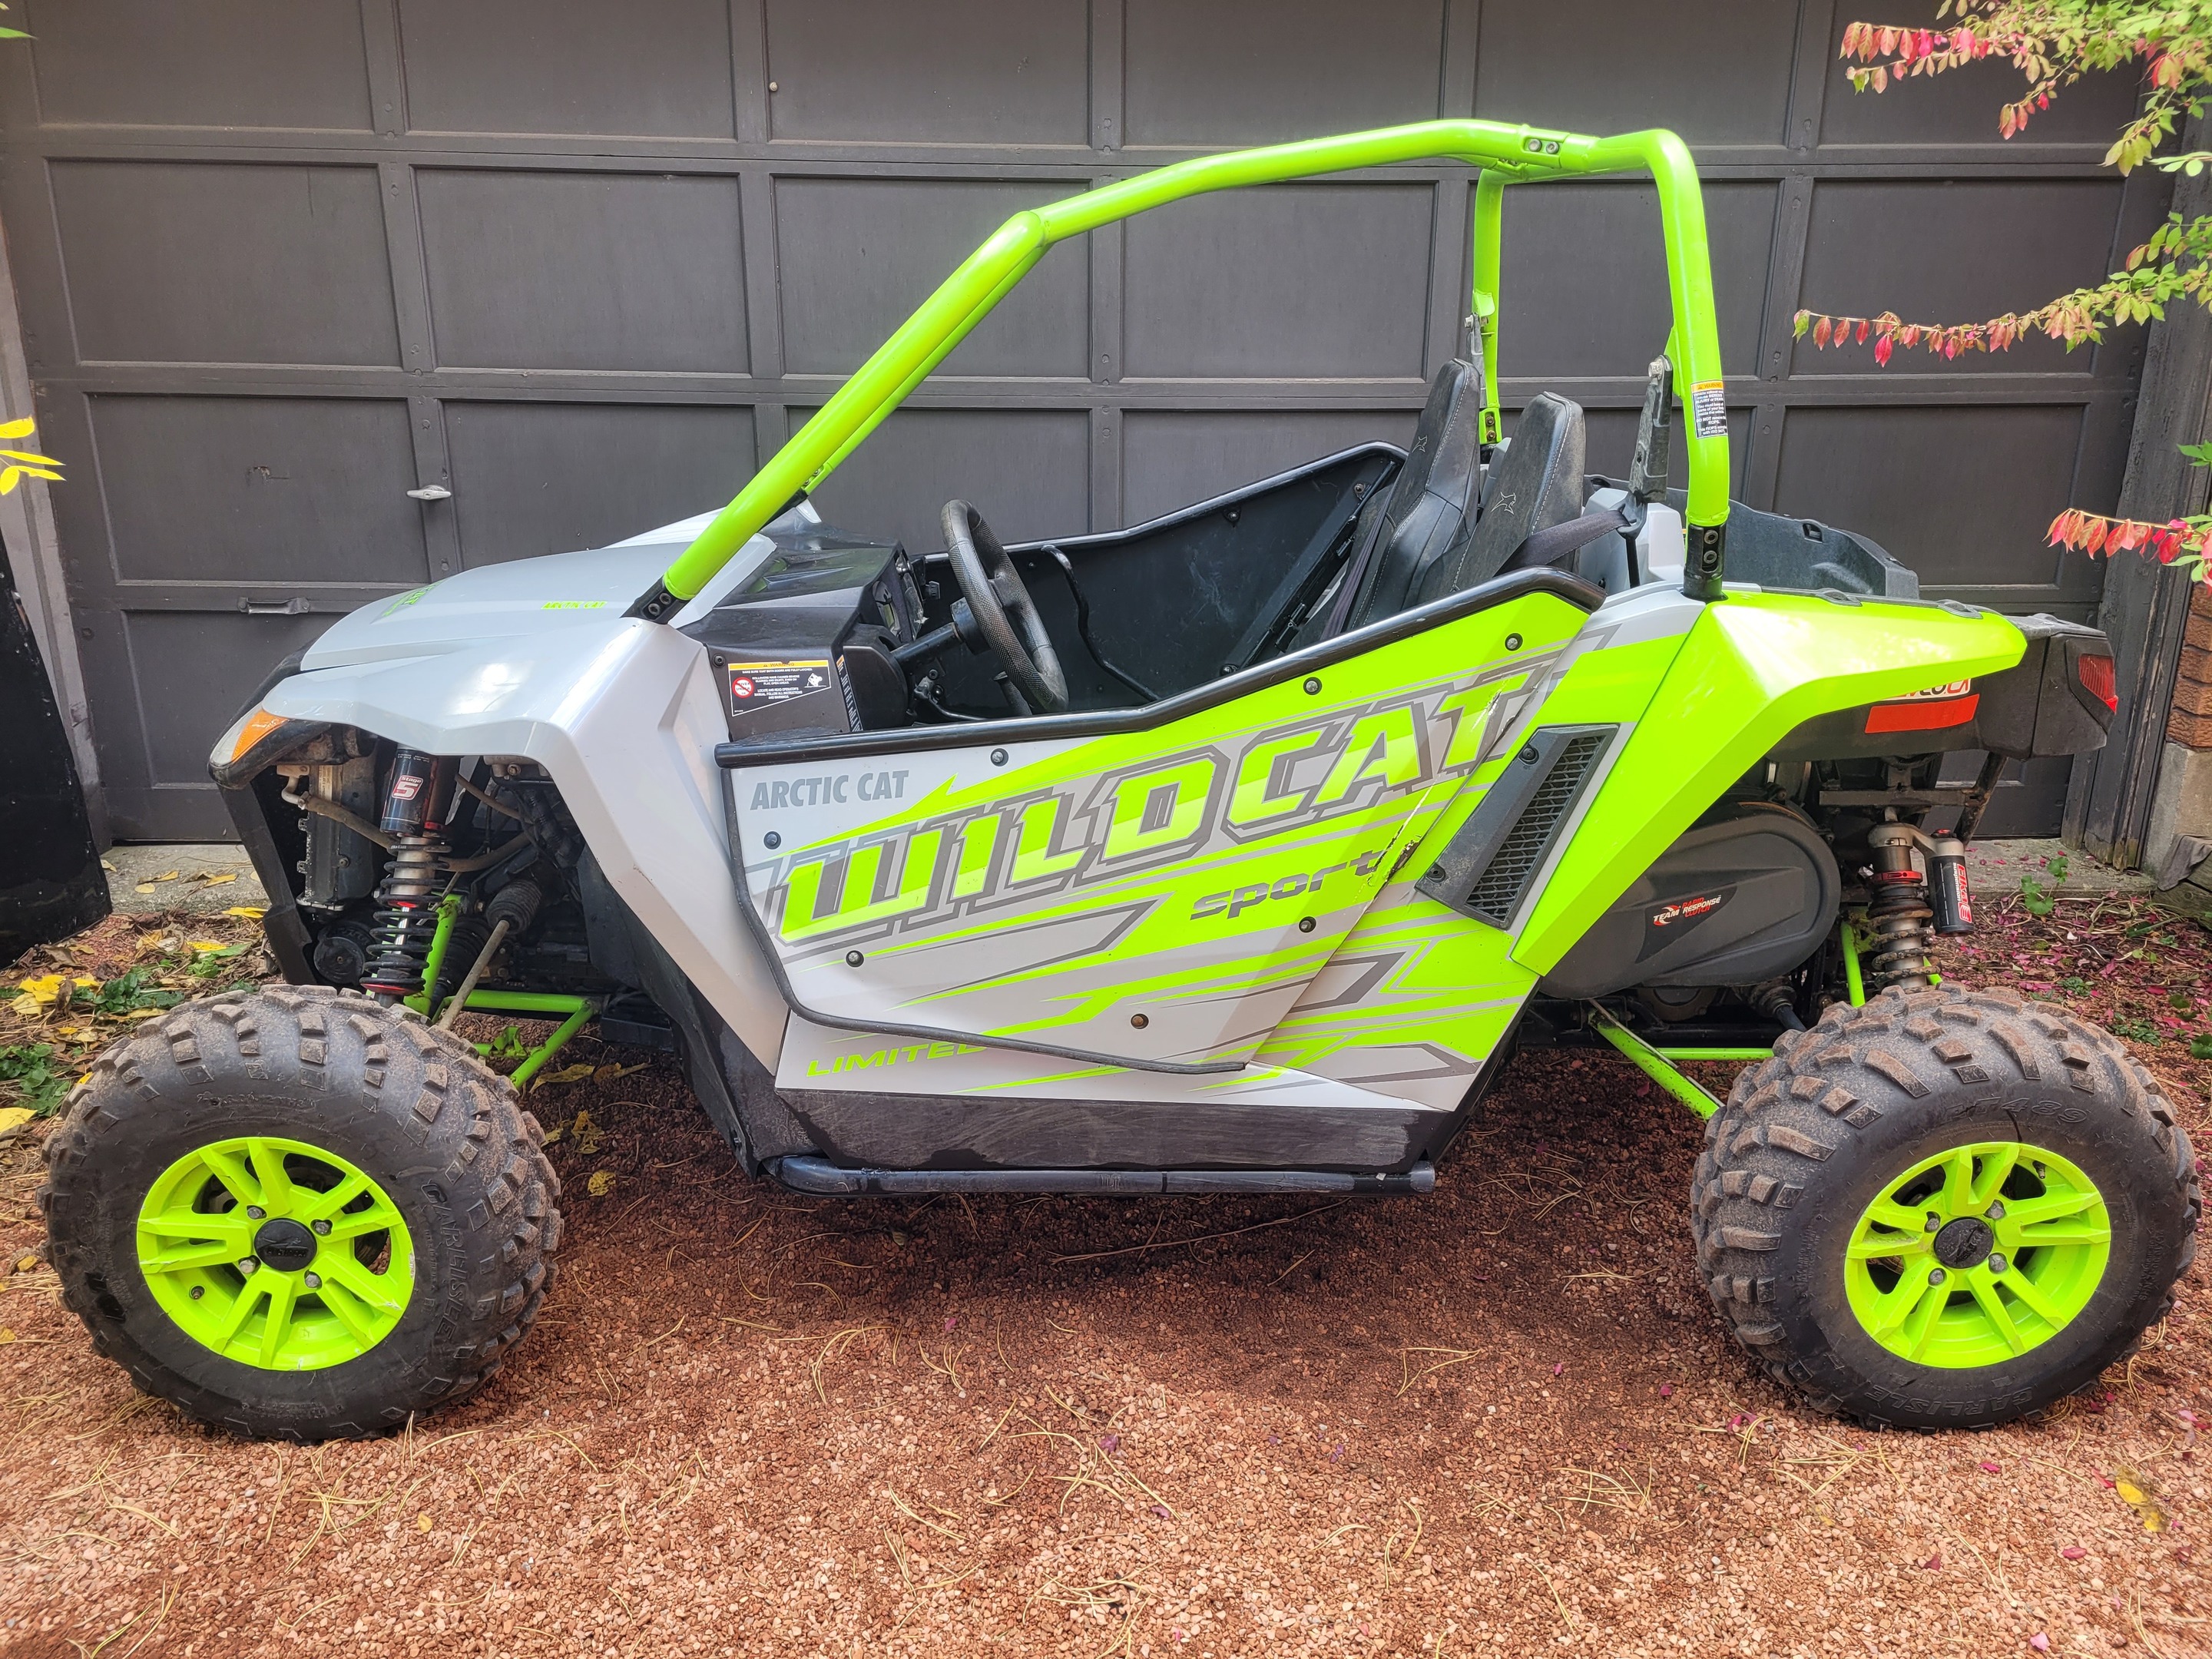 2017 Arctic Cat Wildcat Sport LTD EPS Financing Available & Trade-ins Welcome!